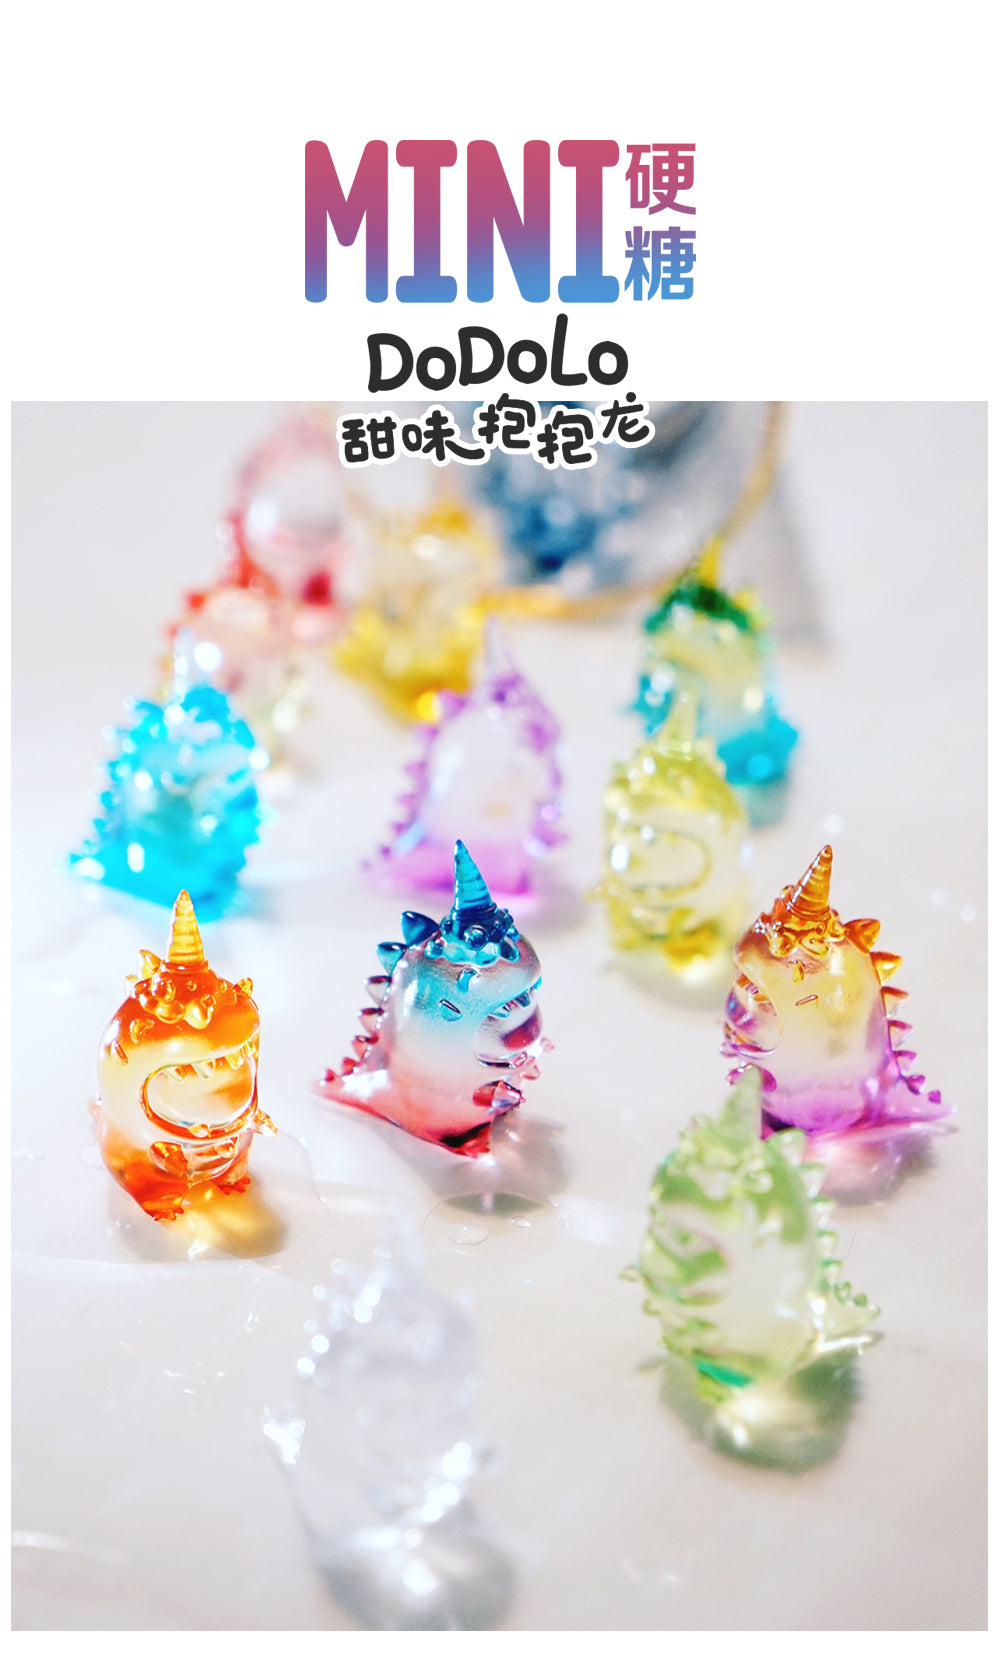 DoDoLo Mini PVC toy set featuring colorful animals, a bottle, dragon figurine, letter, candle, and unicorn.